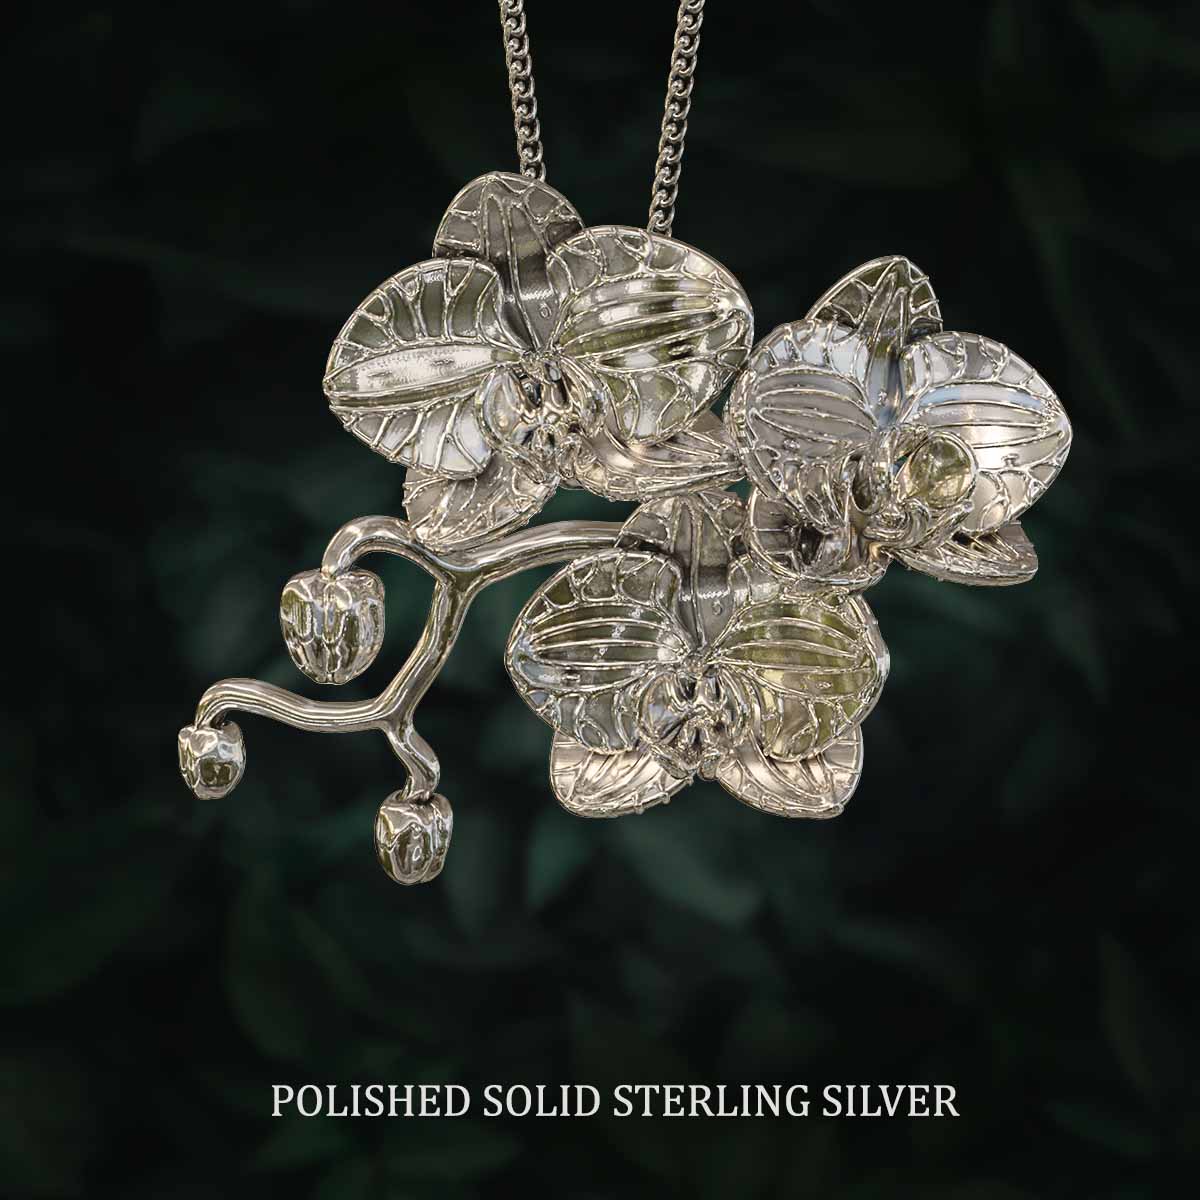 Polished-Solid-Sterling-Silver-Three-Orchid-Flowers-Pendant-Jewelry-For-Necklace